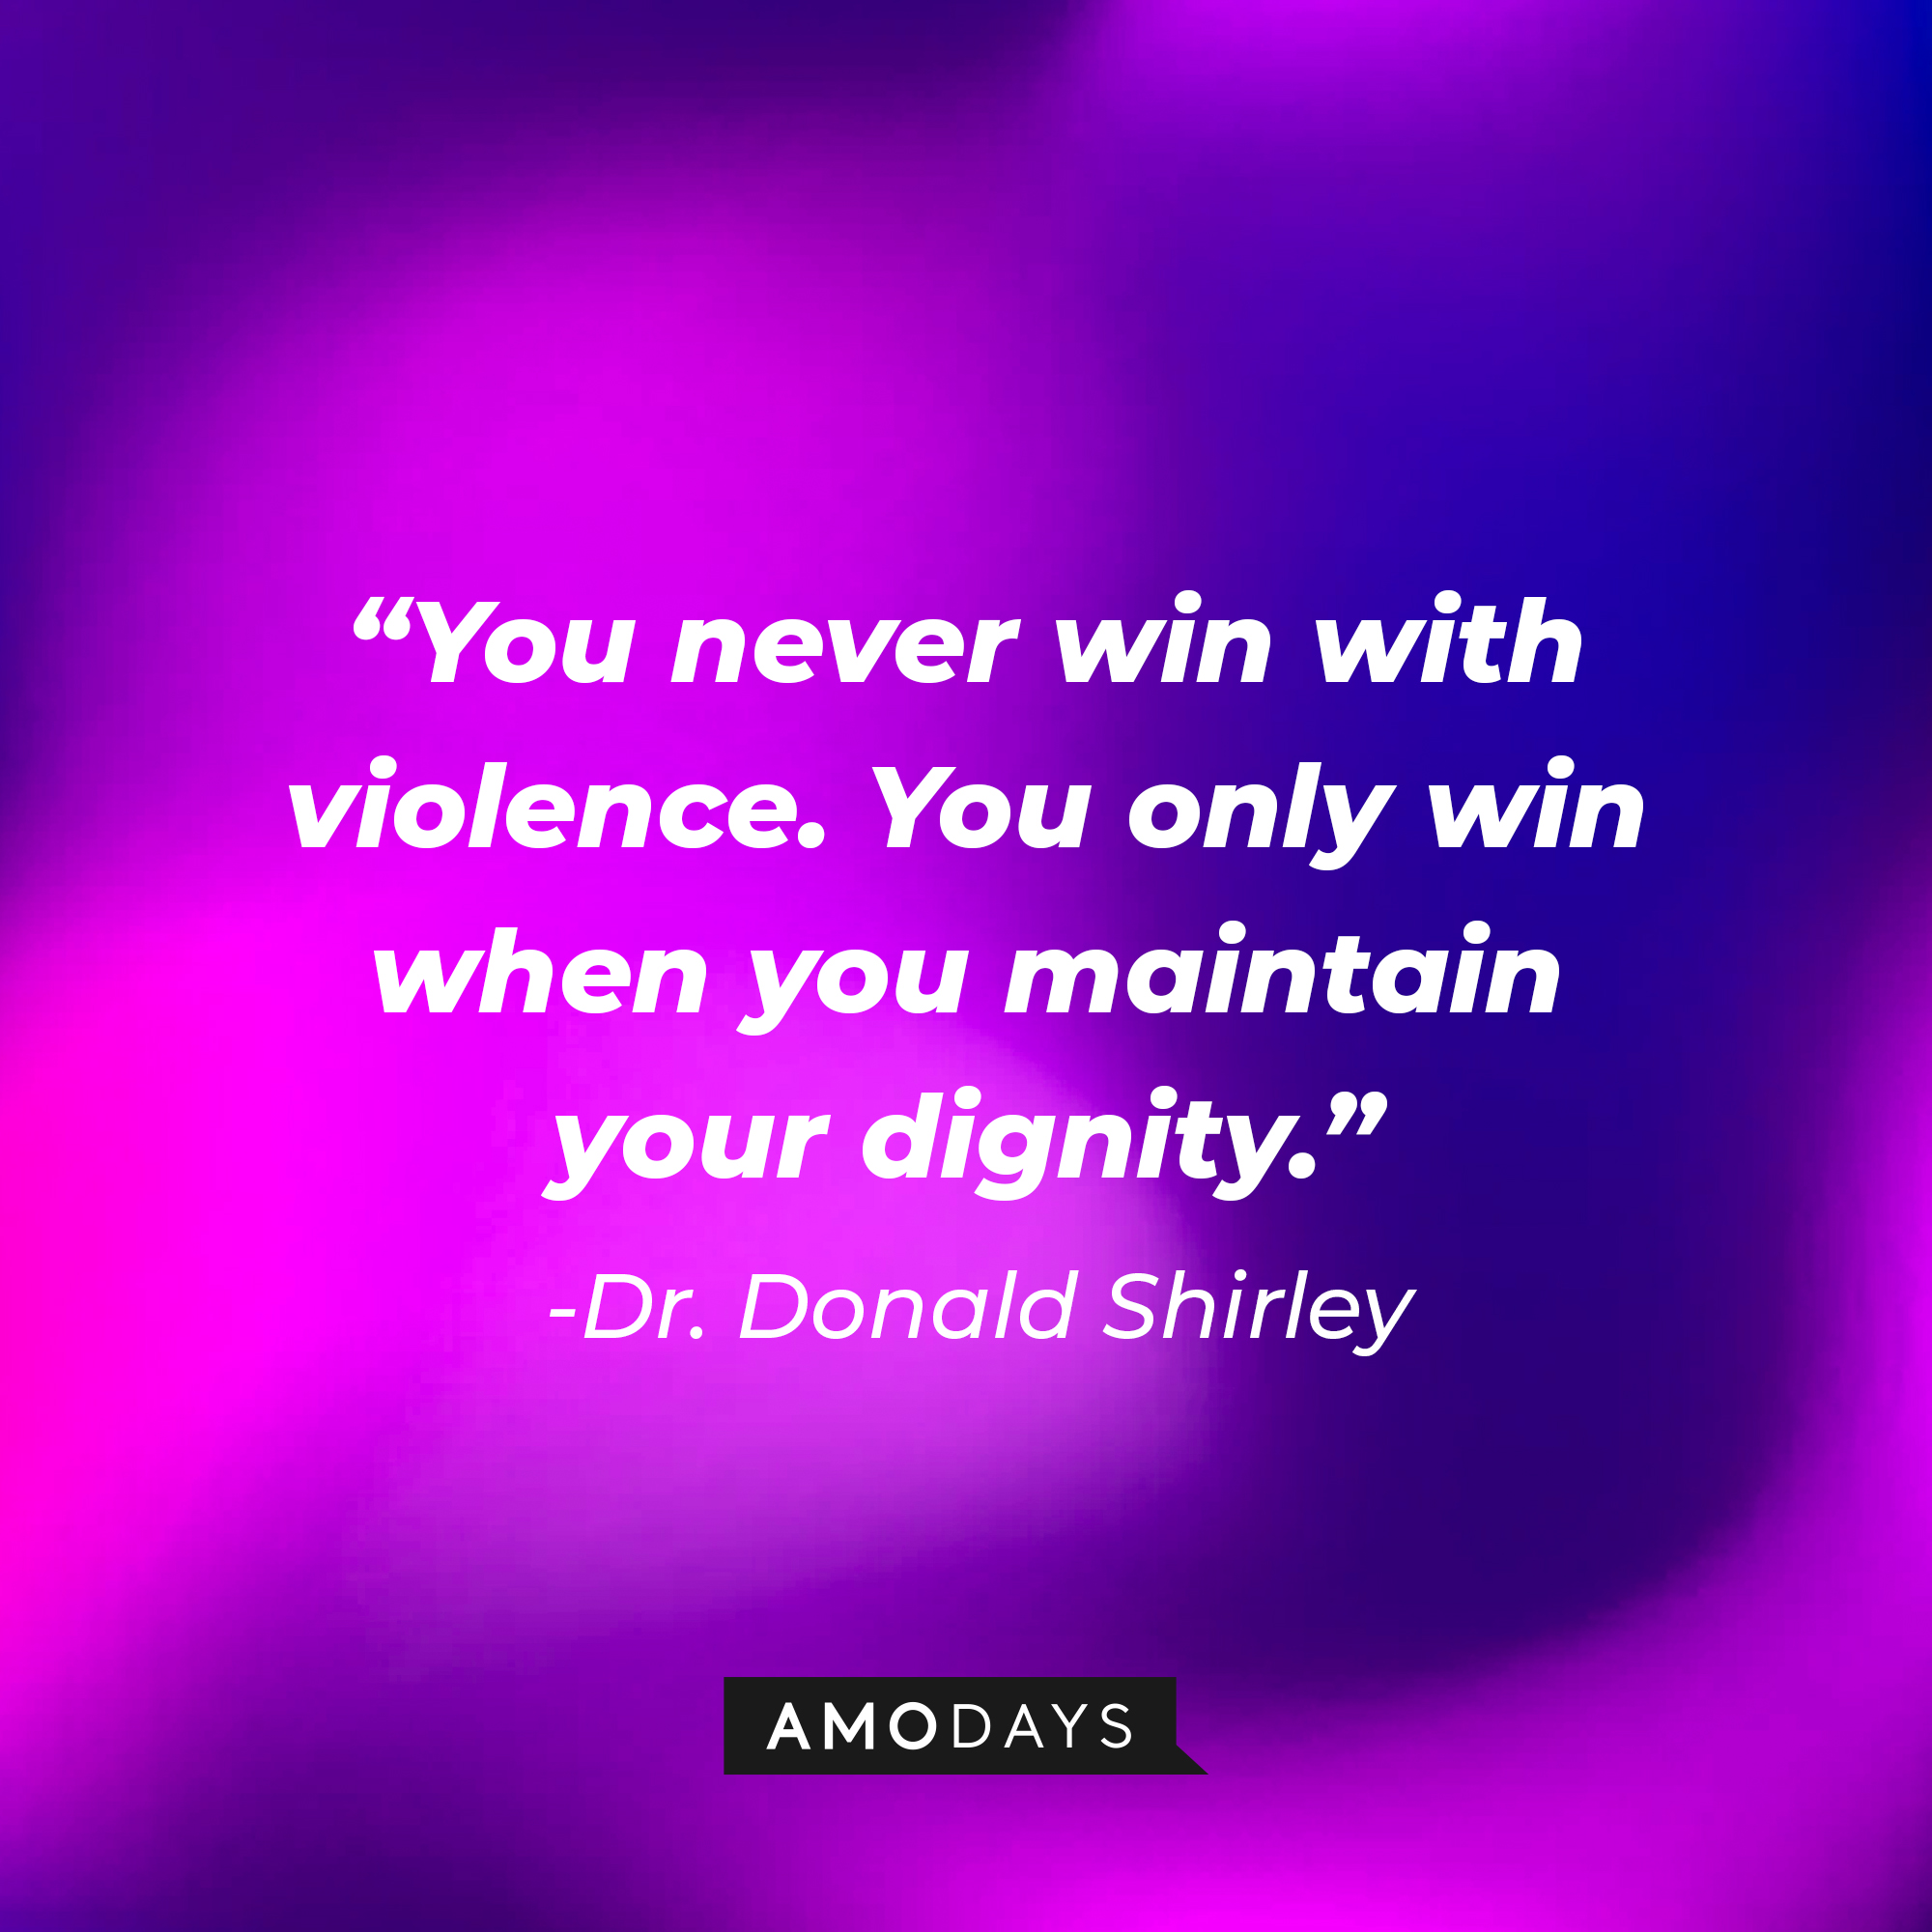 Dr. Donald Shirley's quote: “You never win with violence. You only win when you maintain your dignity." | Source: Amodays